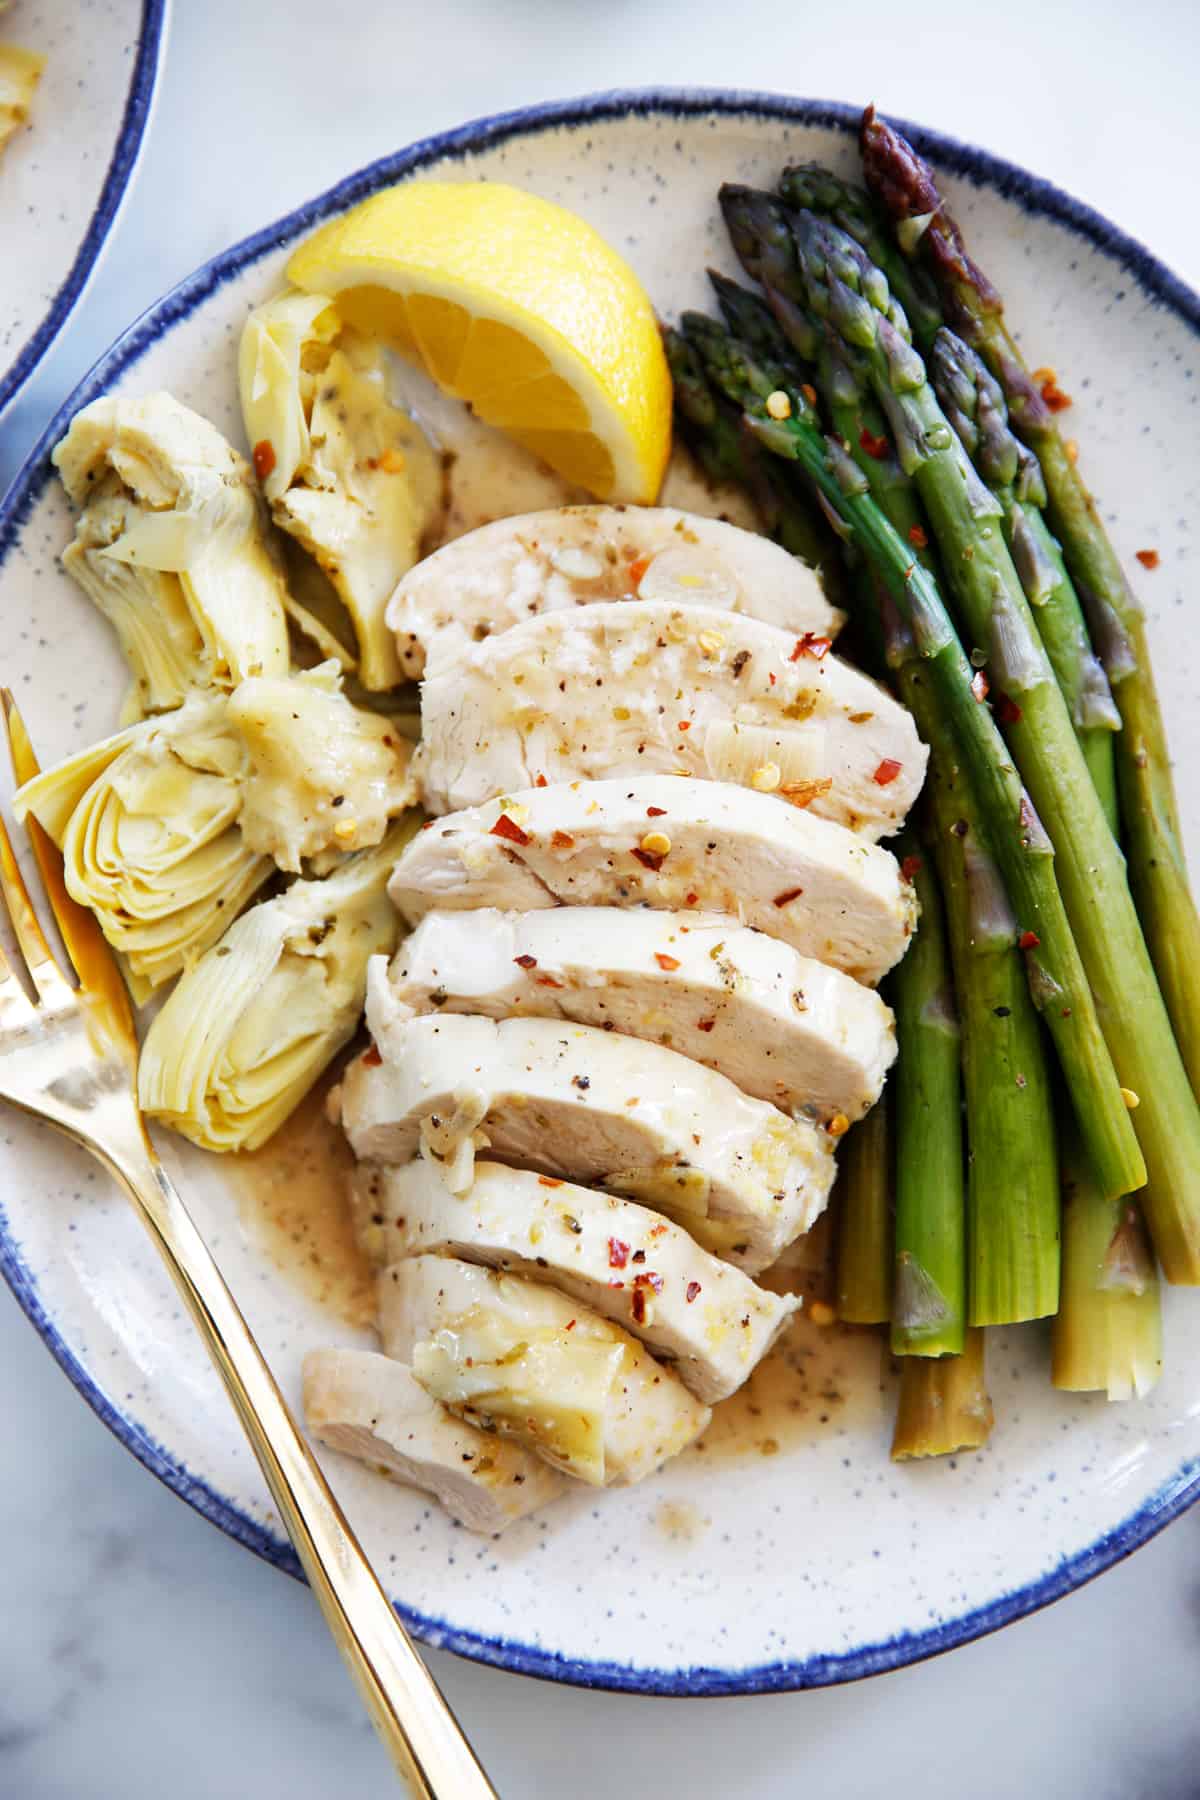 Instant Pot Lemon Chicken with Artichokes and Asparagus